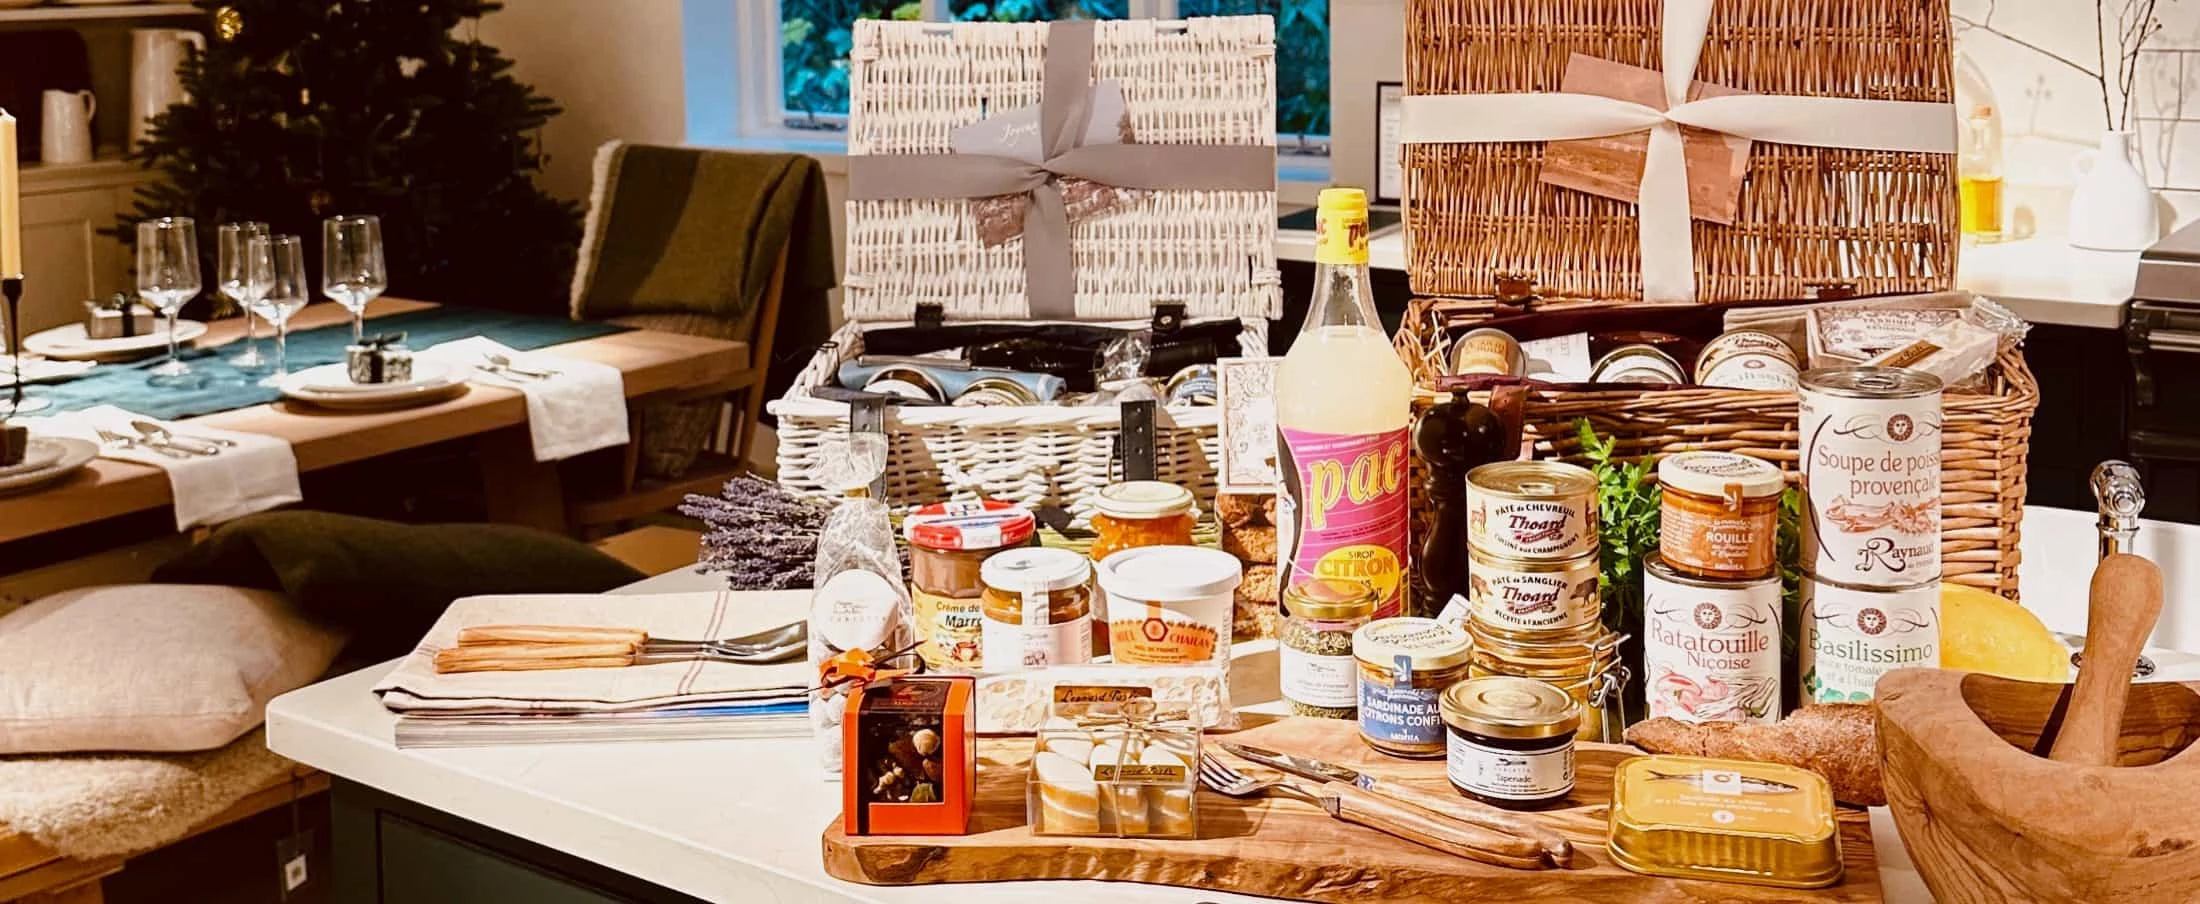 Christmas selection of foodie gifts from Provence, artisan food and wine from Provence and homeware from the South of France